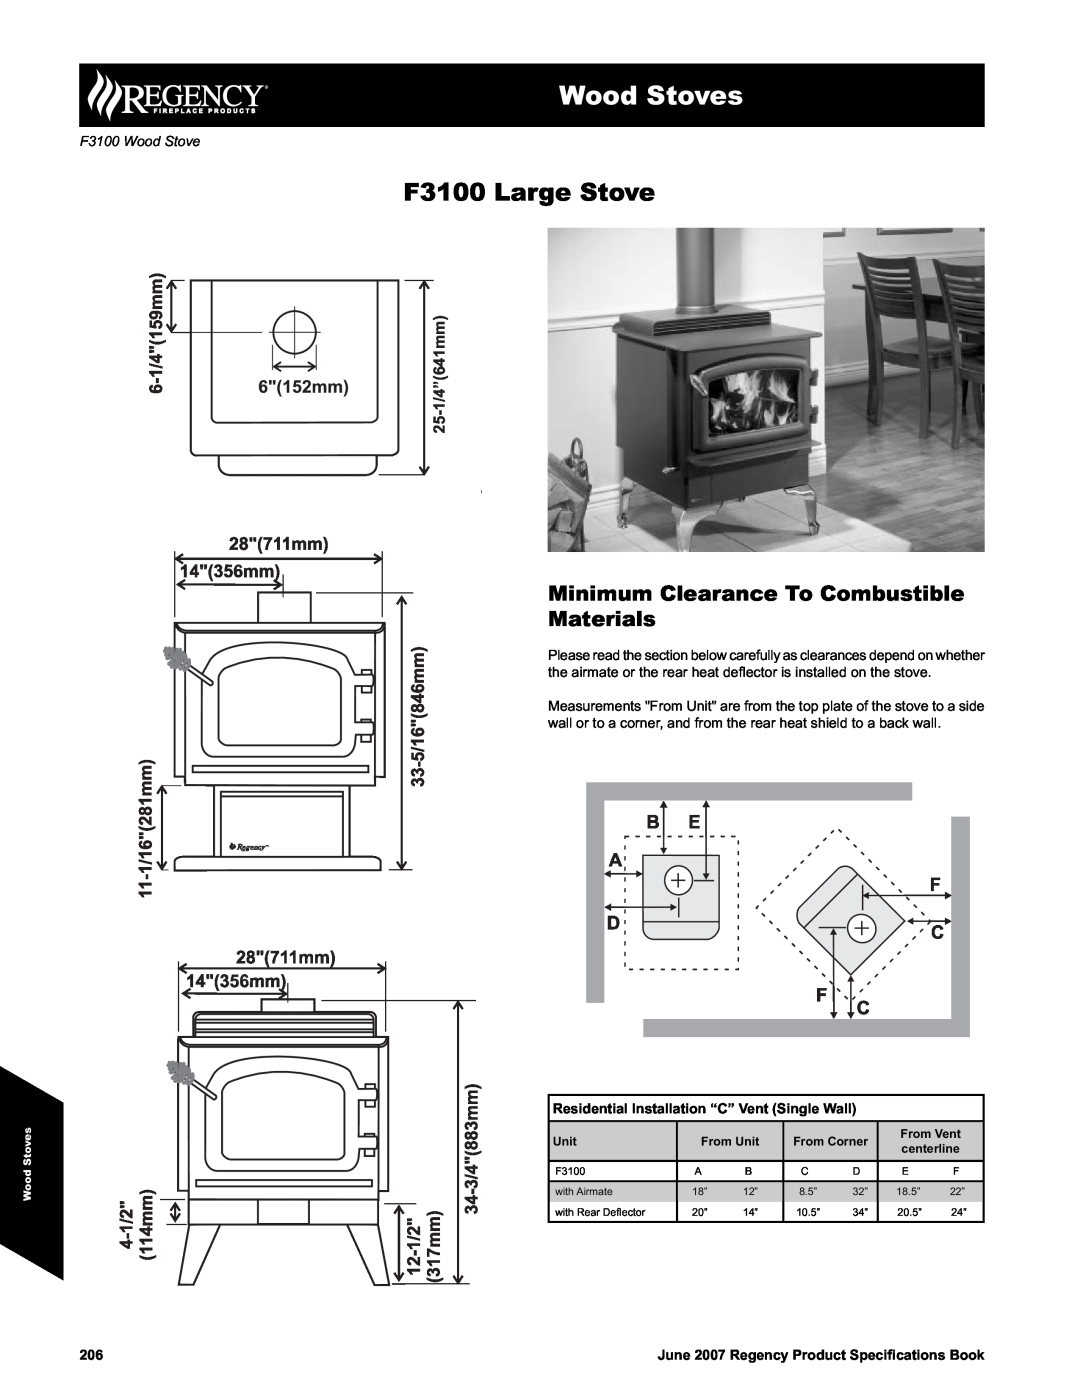 Regency specifications Wood Stoves, Minimum Clearance To Combustible Materials, F3100 Wood Stove, F3100 Large Stove 